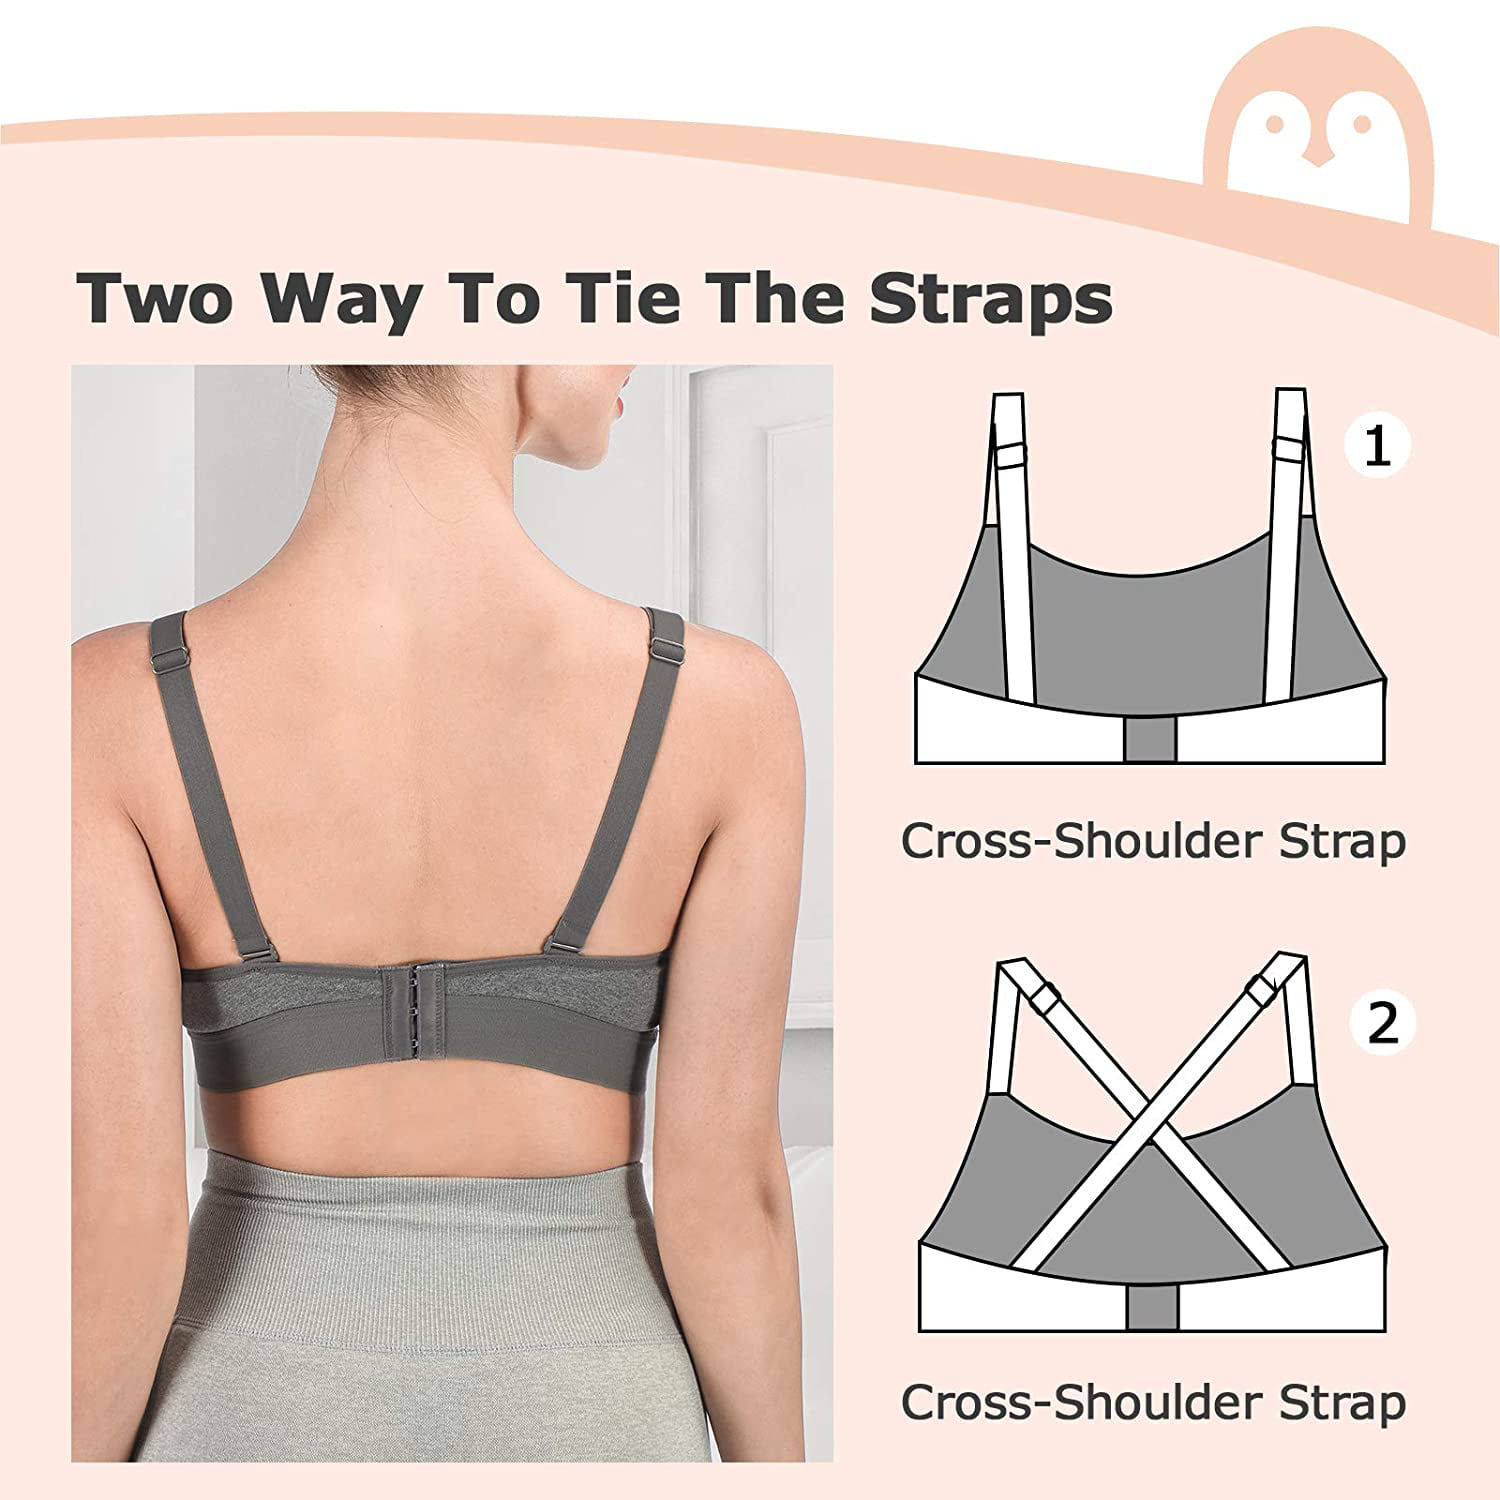 Best Pumping Bra For Spectra (Pump Hands Free with My Top 2 Picks